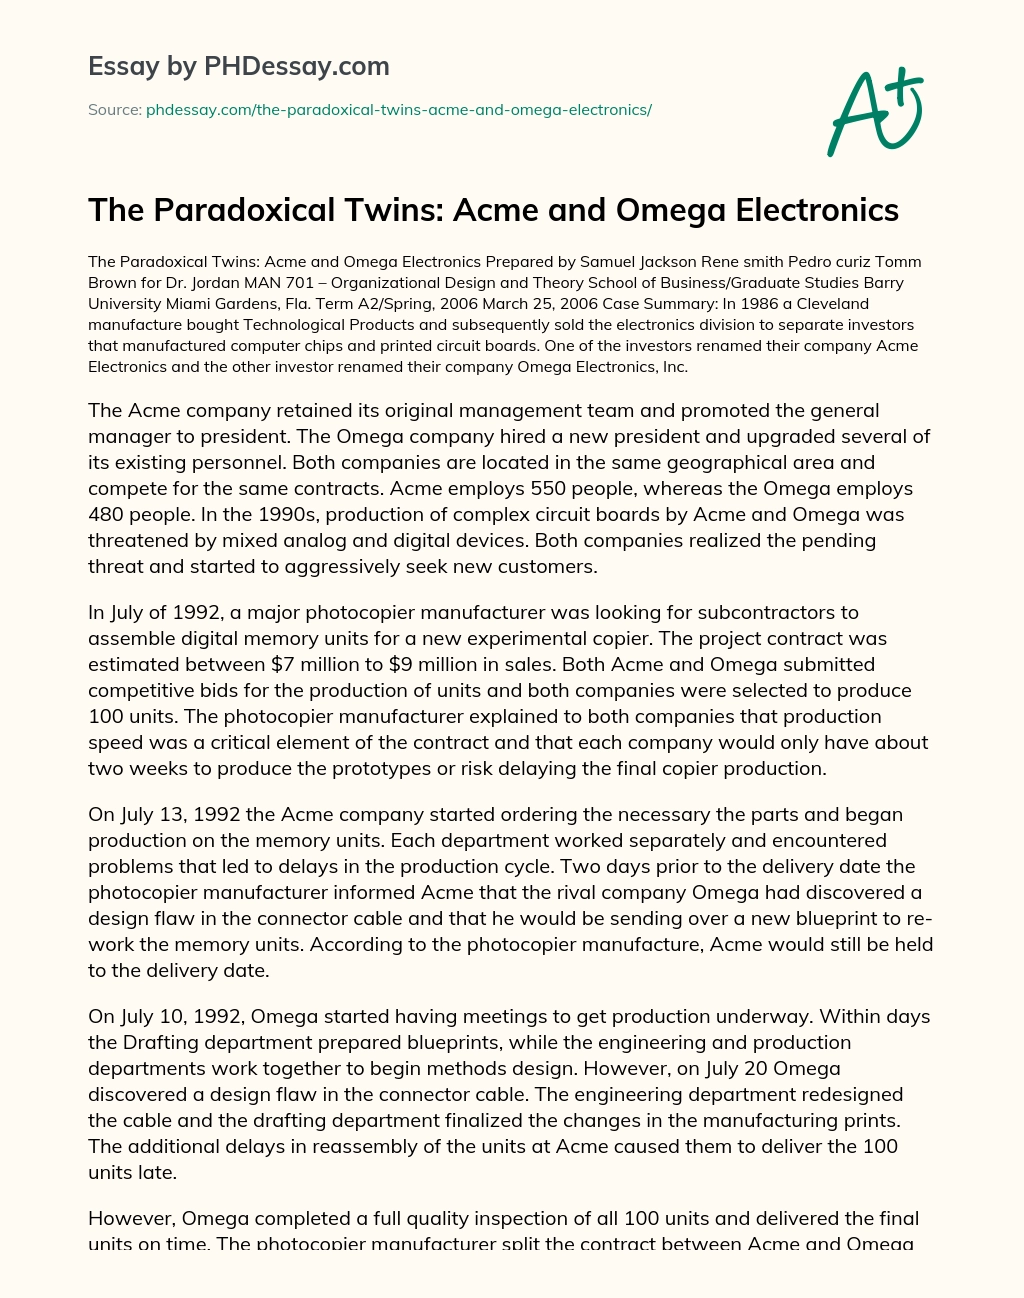 The Paradoxical Twins: Acme and Omega Electronics essay